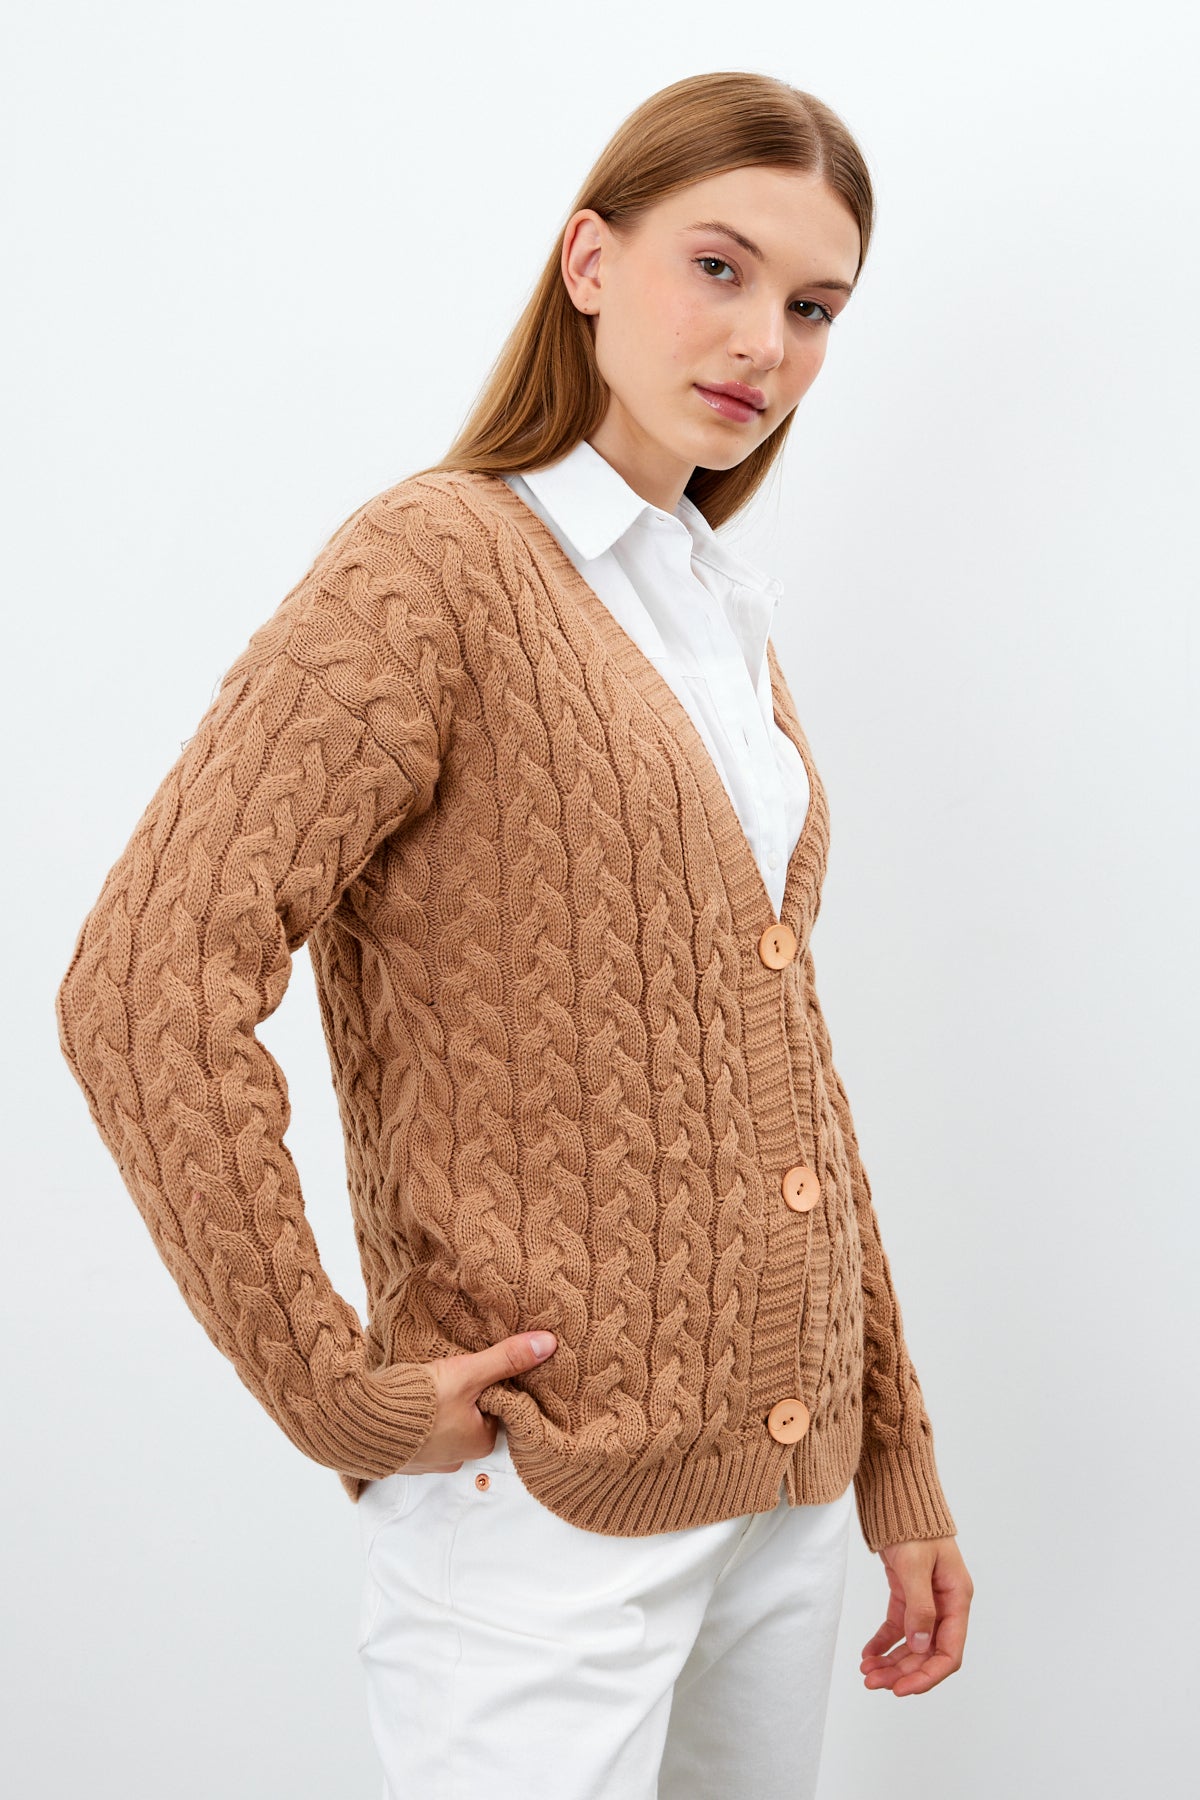 Solid Color Short Knit Cardigan Thick Knitted Details - SKU: 3790